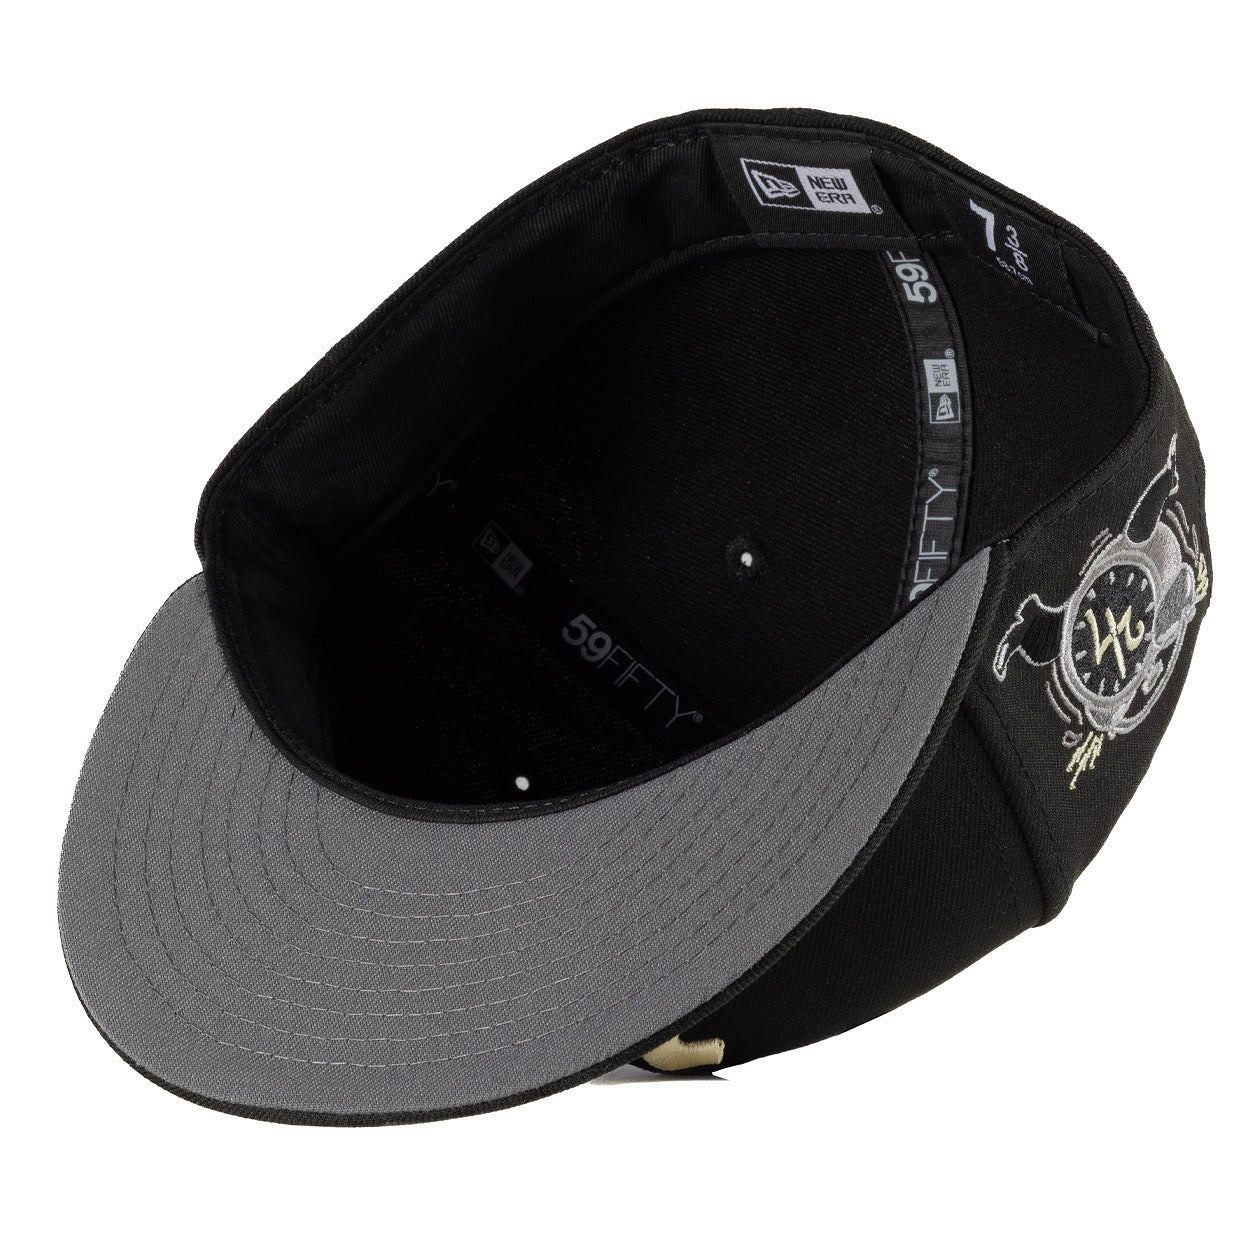 24/7 Bolt New Era Fitted